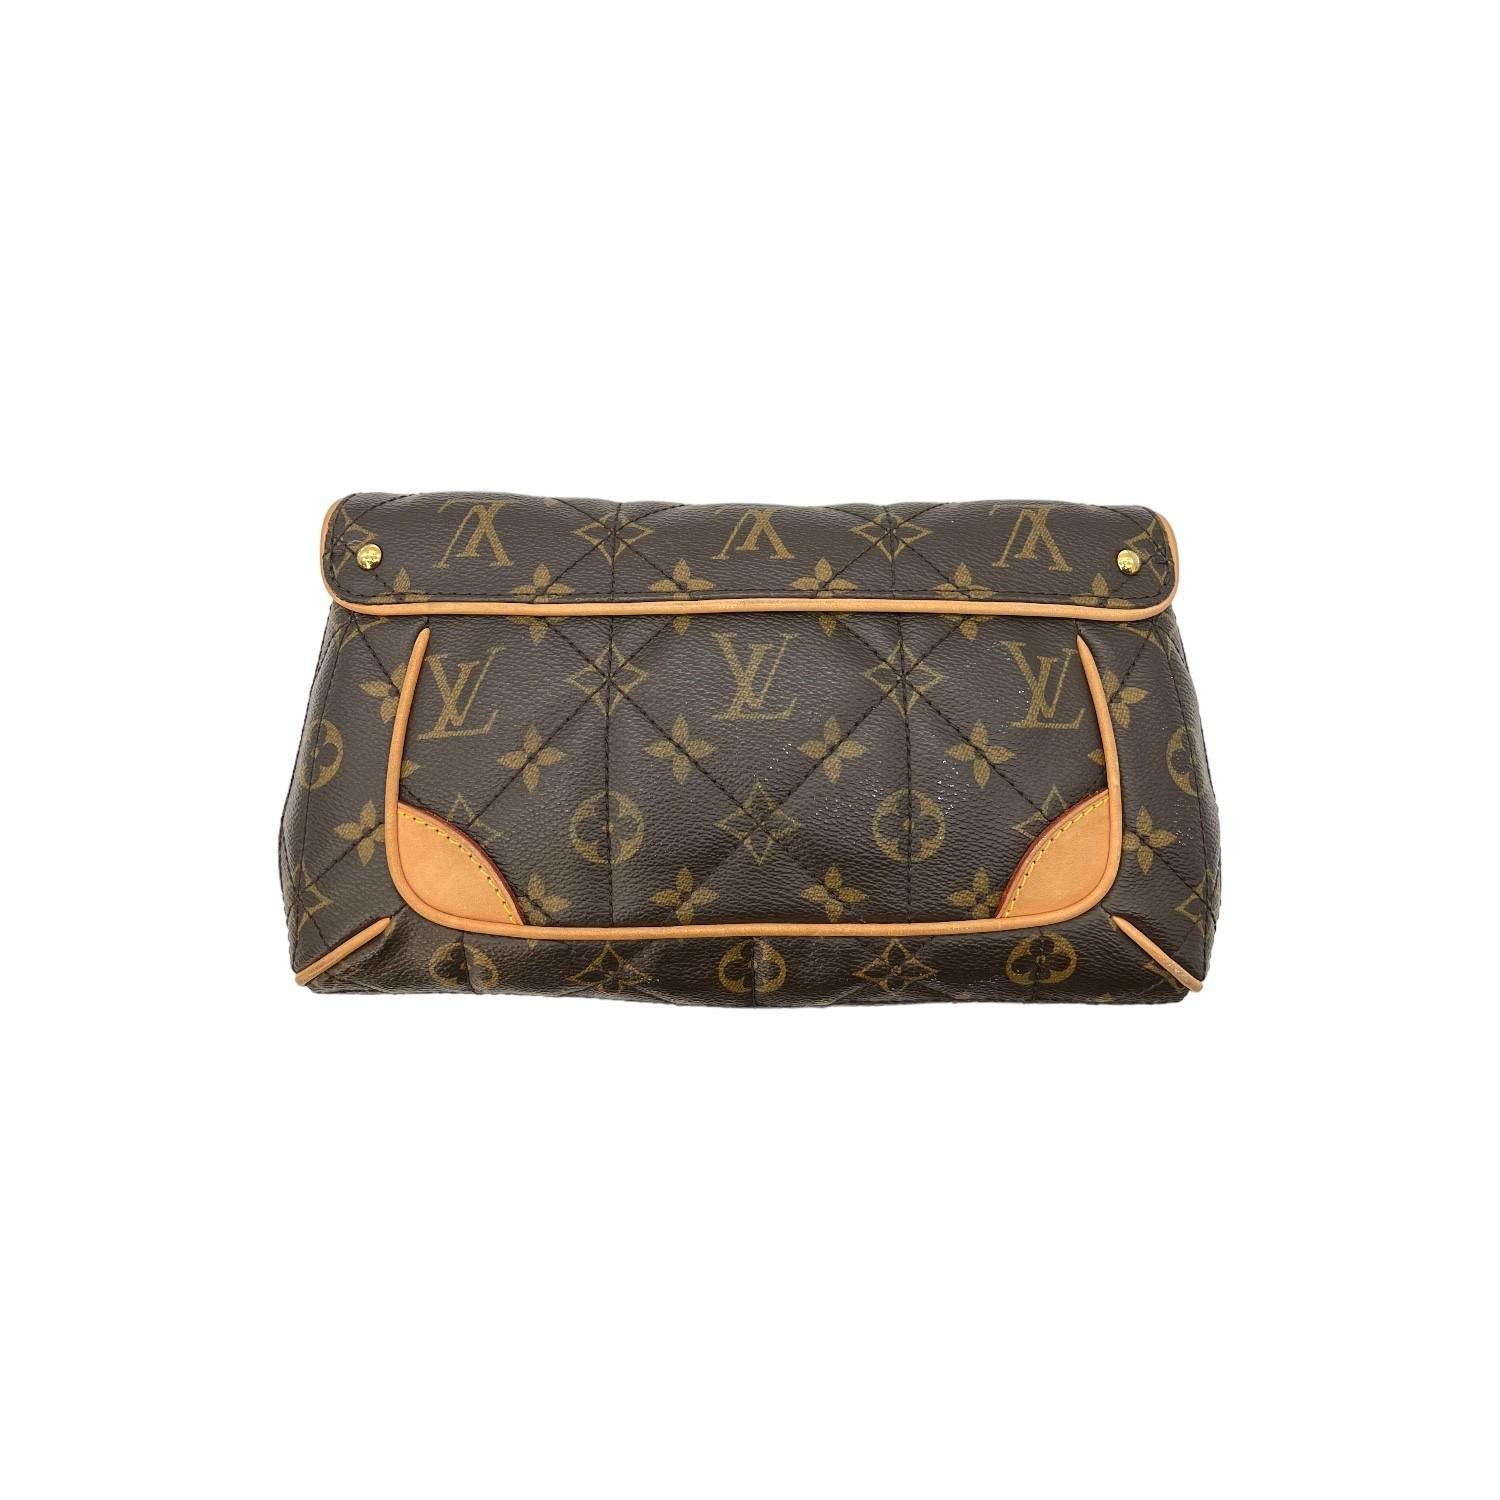 This Louis Vuitton Monogram Etoile Clutch was made in France in 2009 and it is finely crafted of the classic Louis Vuitton Monogram coated canvas with leather trimming and gold-tone hardware features. It has a locking pull through closure that opens